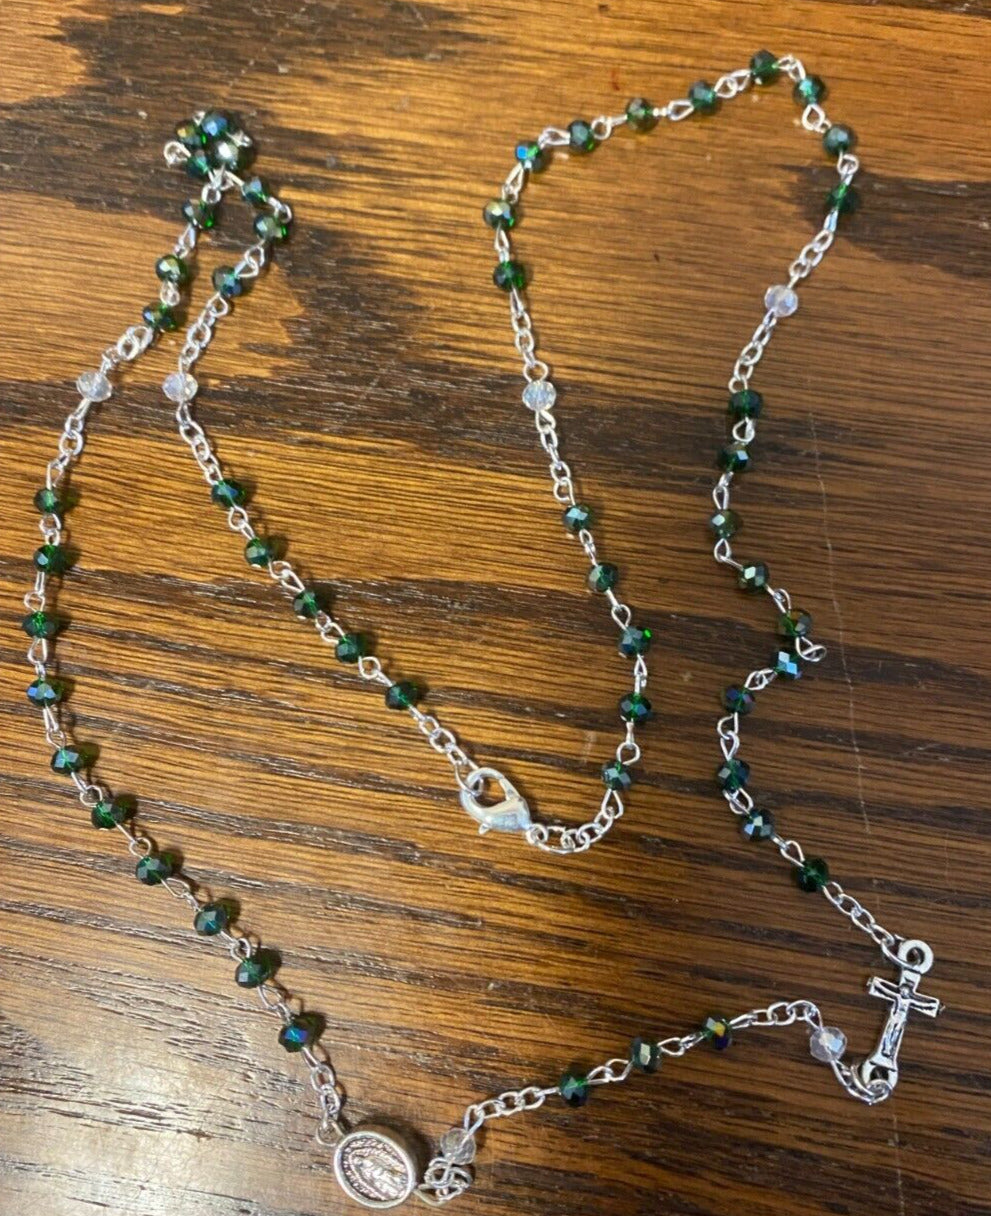 Our Lady of Guadalupe Green Glass Beads Rosary Necklace, New